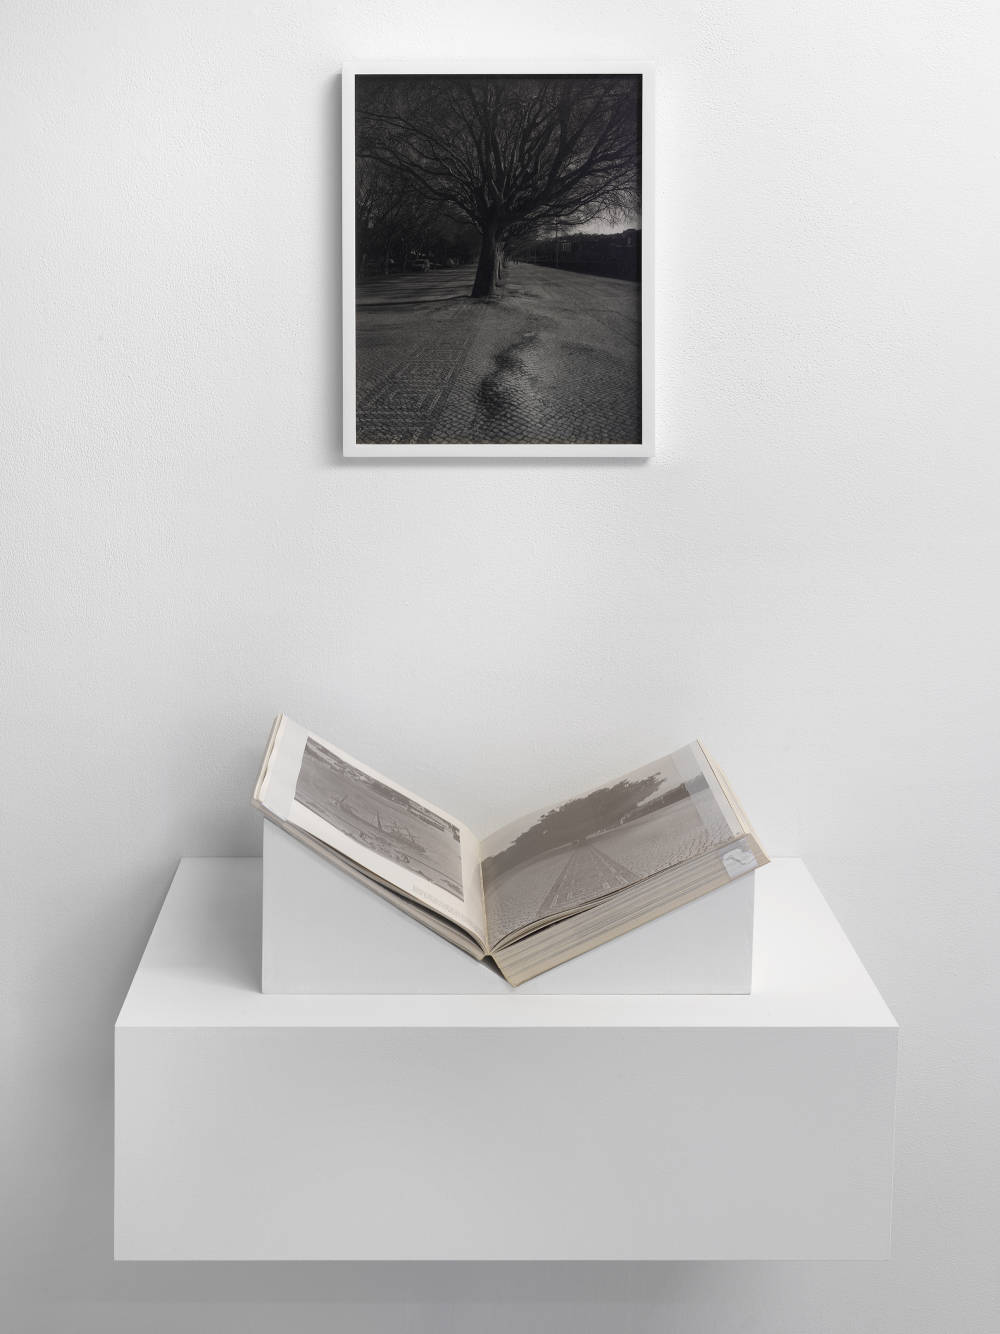 Display Installation of a framed photograph of a black and white photo, mounted on a white wall, containing a Tree and its roots which raise a stone pavement. Below the pictured frame is a display which holds a book open. The book shows a photograph of a black and white photo of the same tree and pavement, but much earlier. 